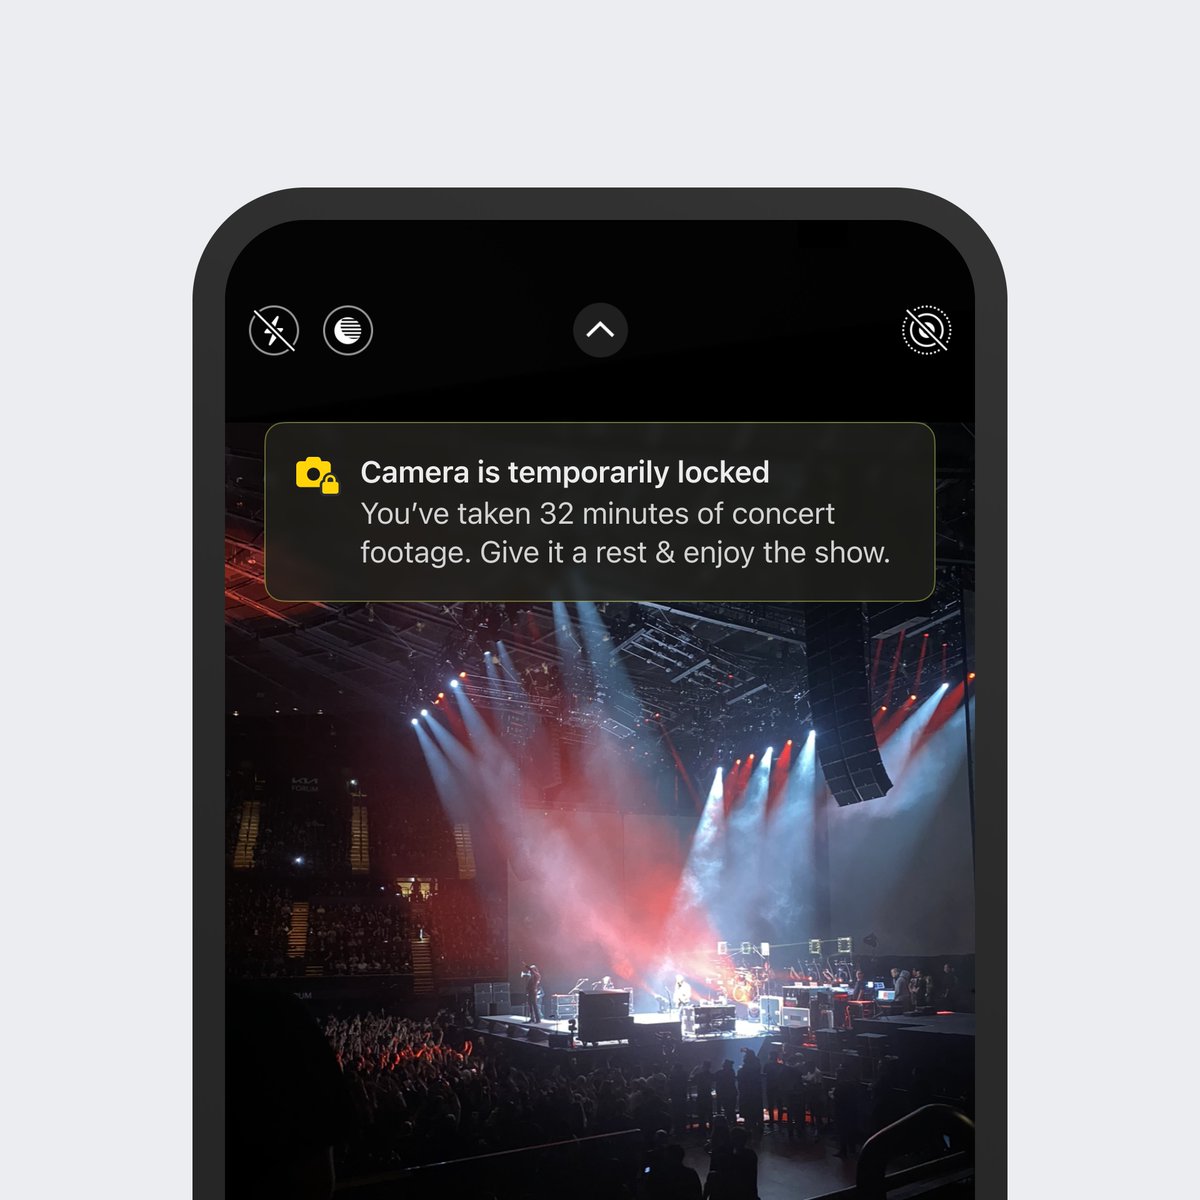 iOS camera lock if you record too much concert footage